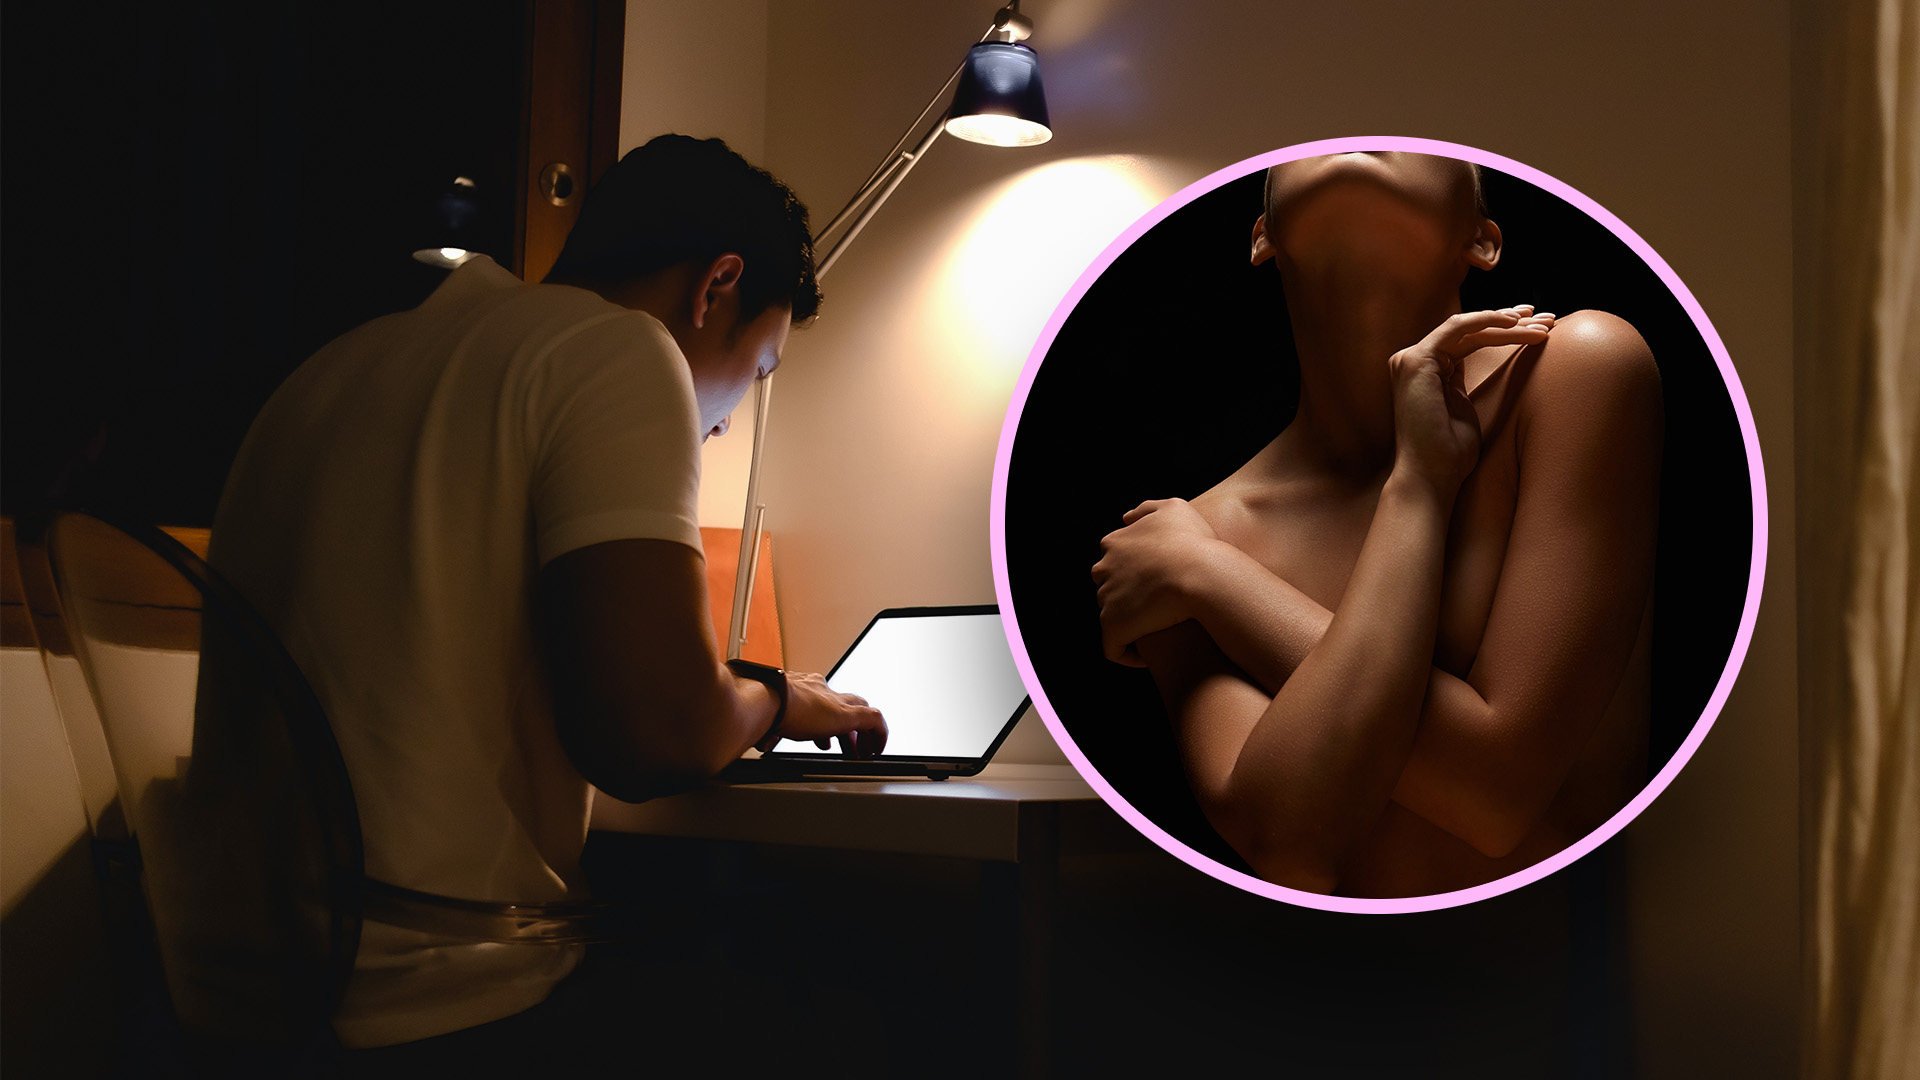 A Chinese woman in Malaysia has told of her anguish after finding out that her husband was selling nude photos of her on the internet. Photo: SCMP composite/Shutterstock
